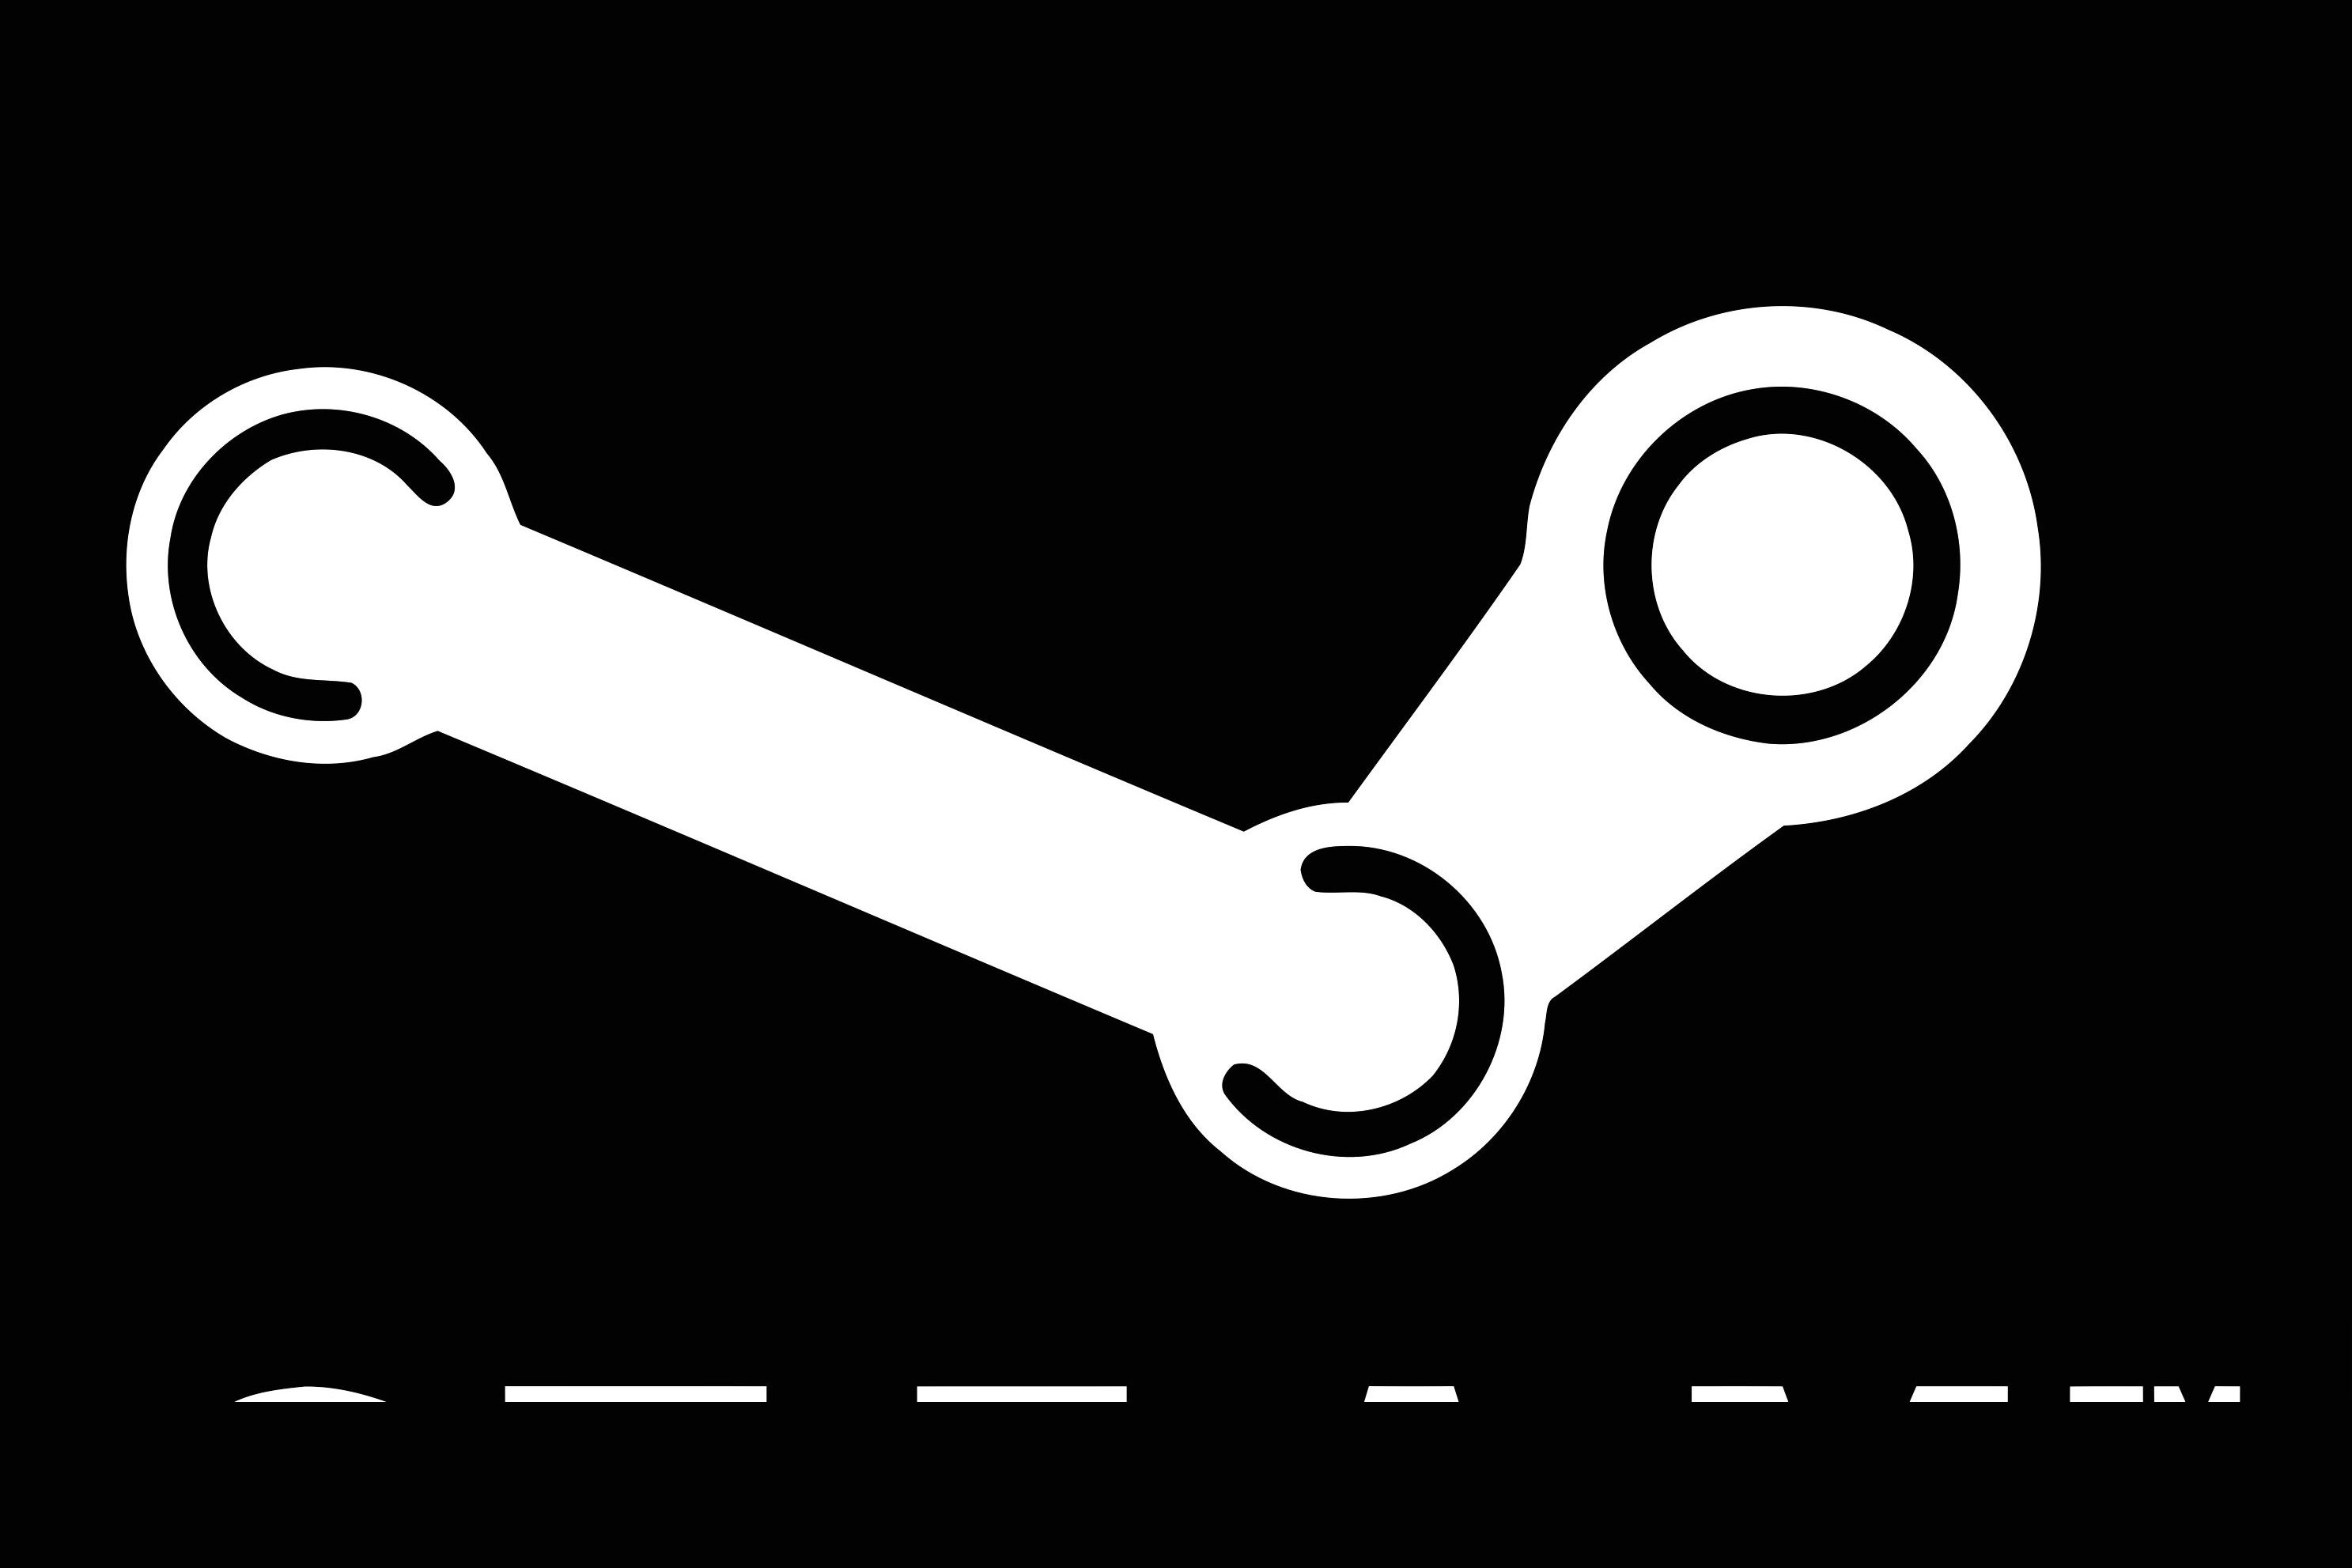 All steam icons gone фото 52